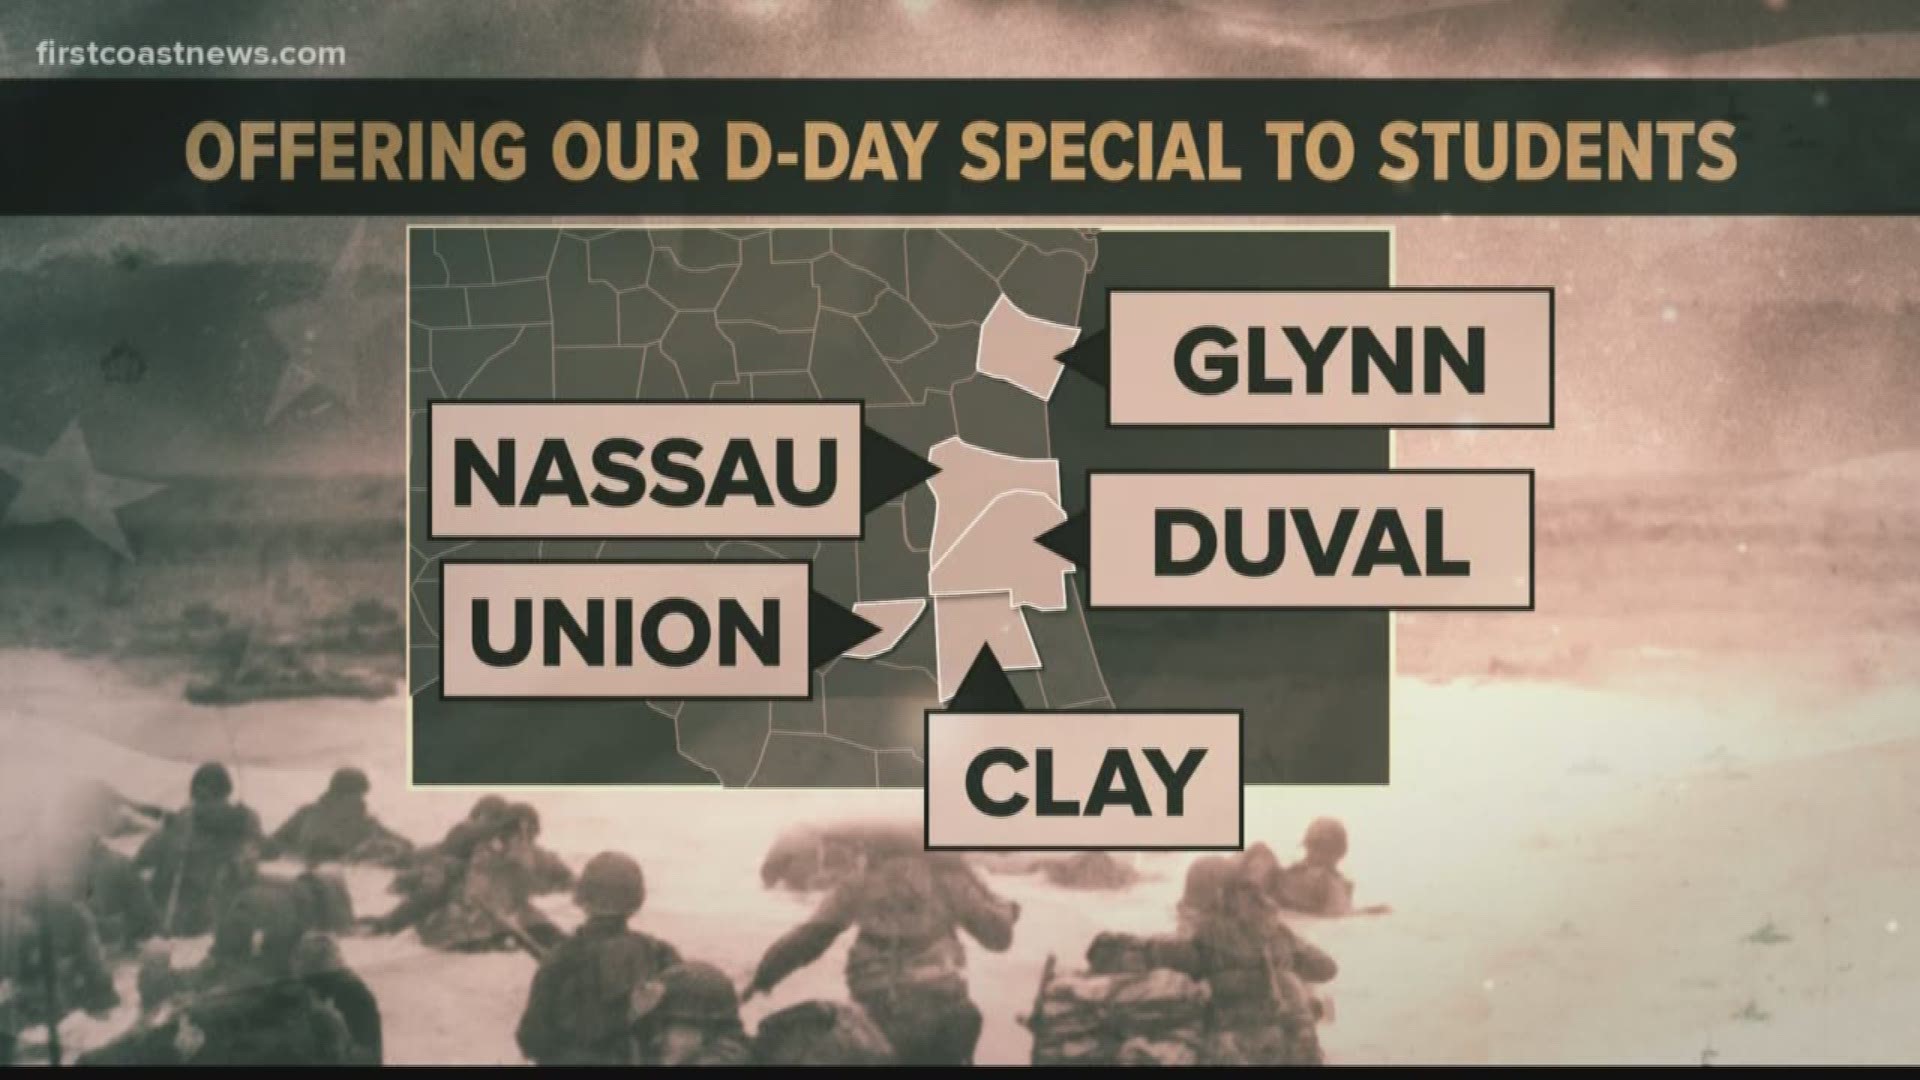 School districts in Glynn and Nassau counties are the latest districts to join in the effort to make certain students graduate with an appreciation for D-DAY vets.